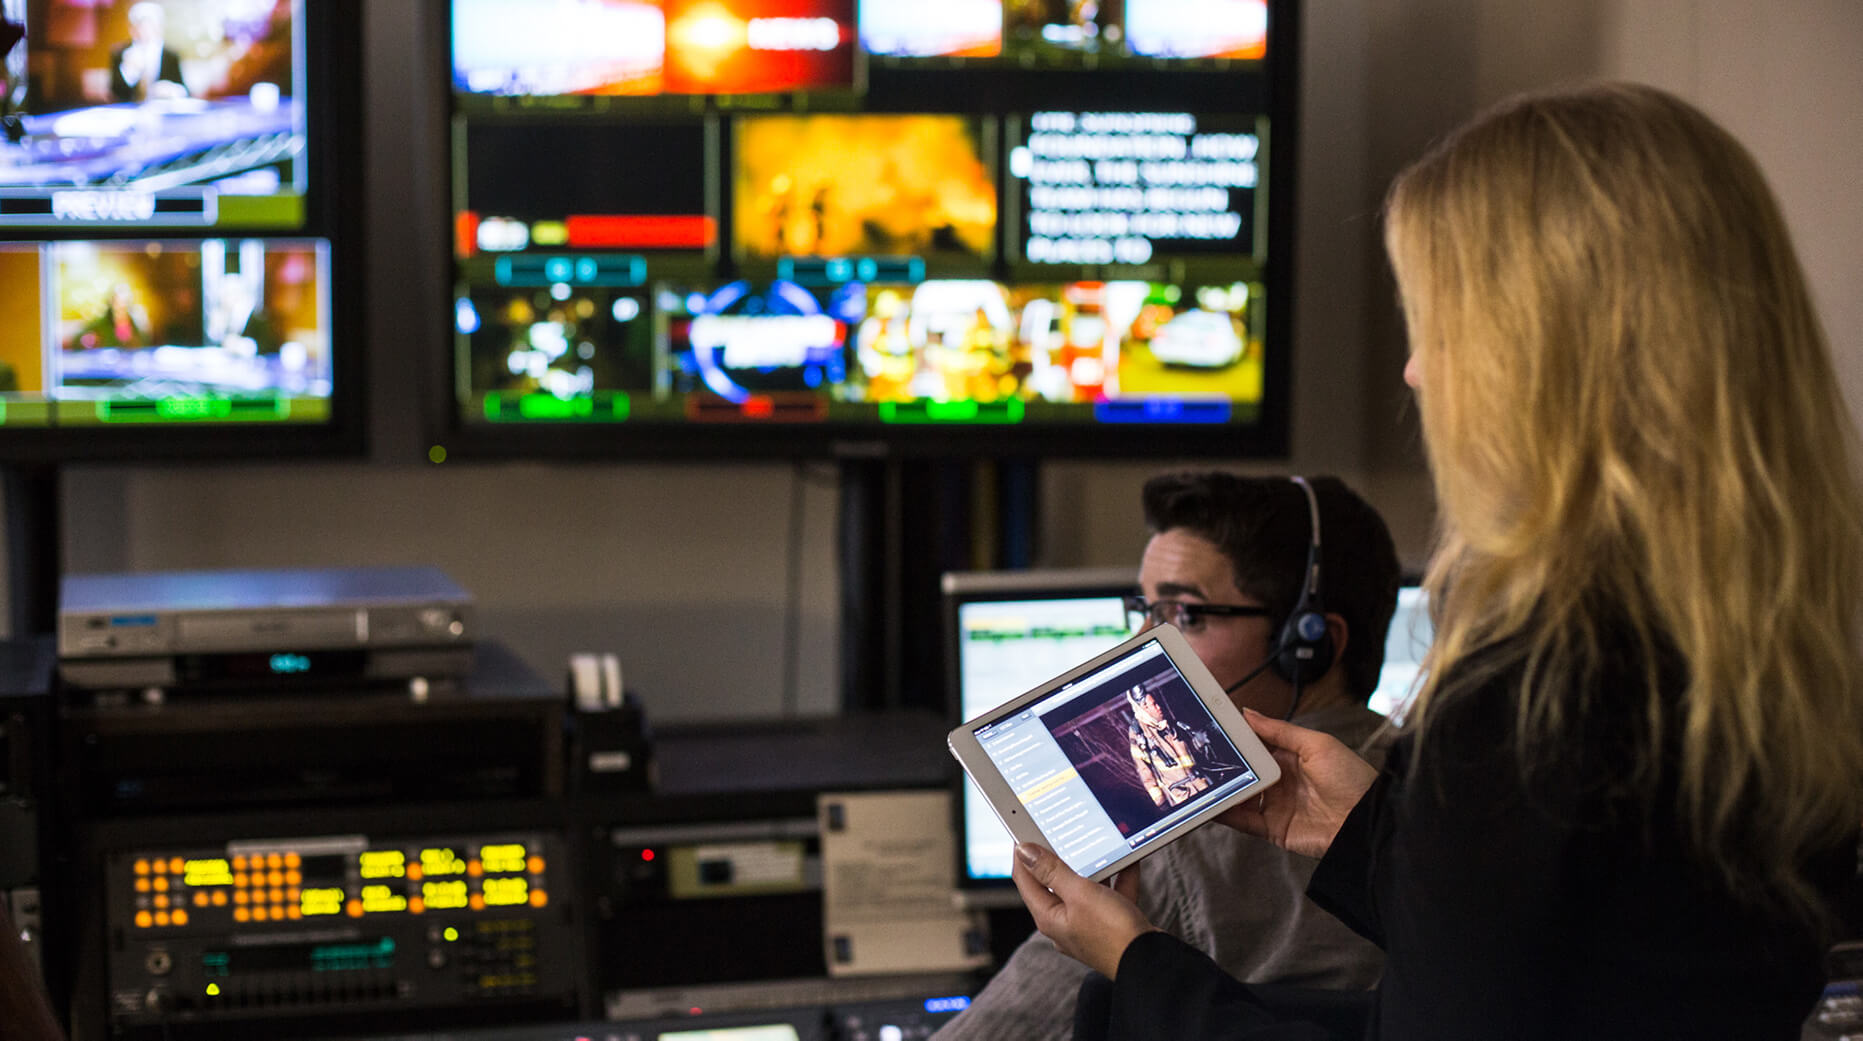 How To Broadcast From Tablet To TV